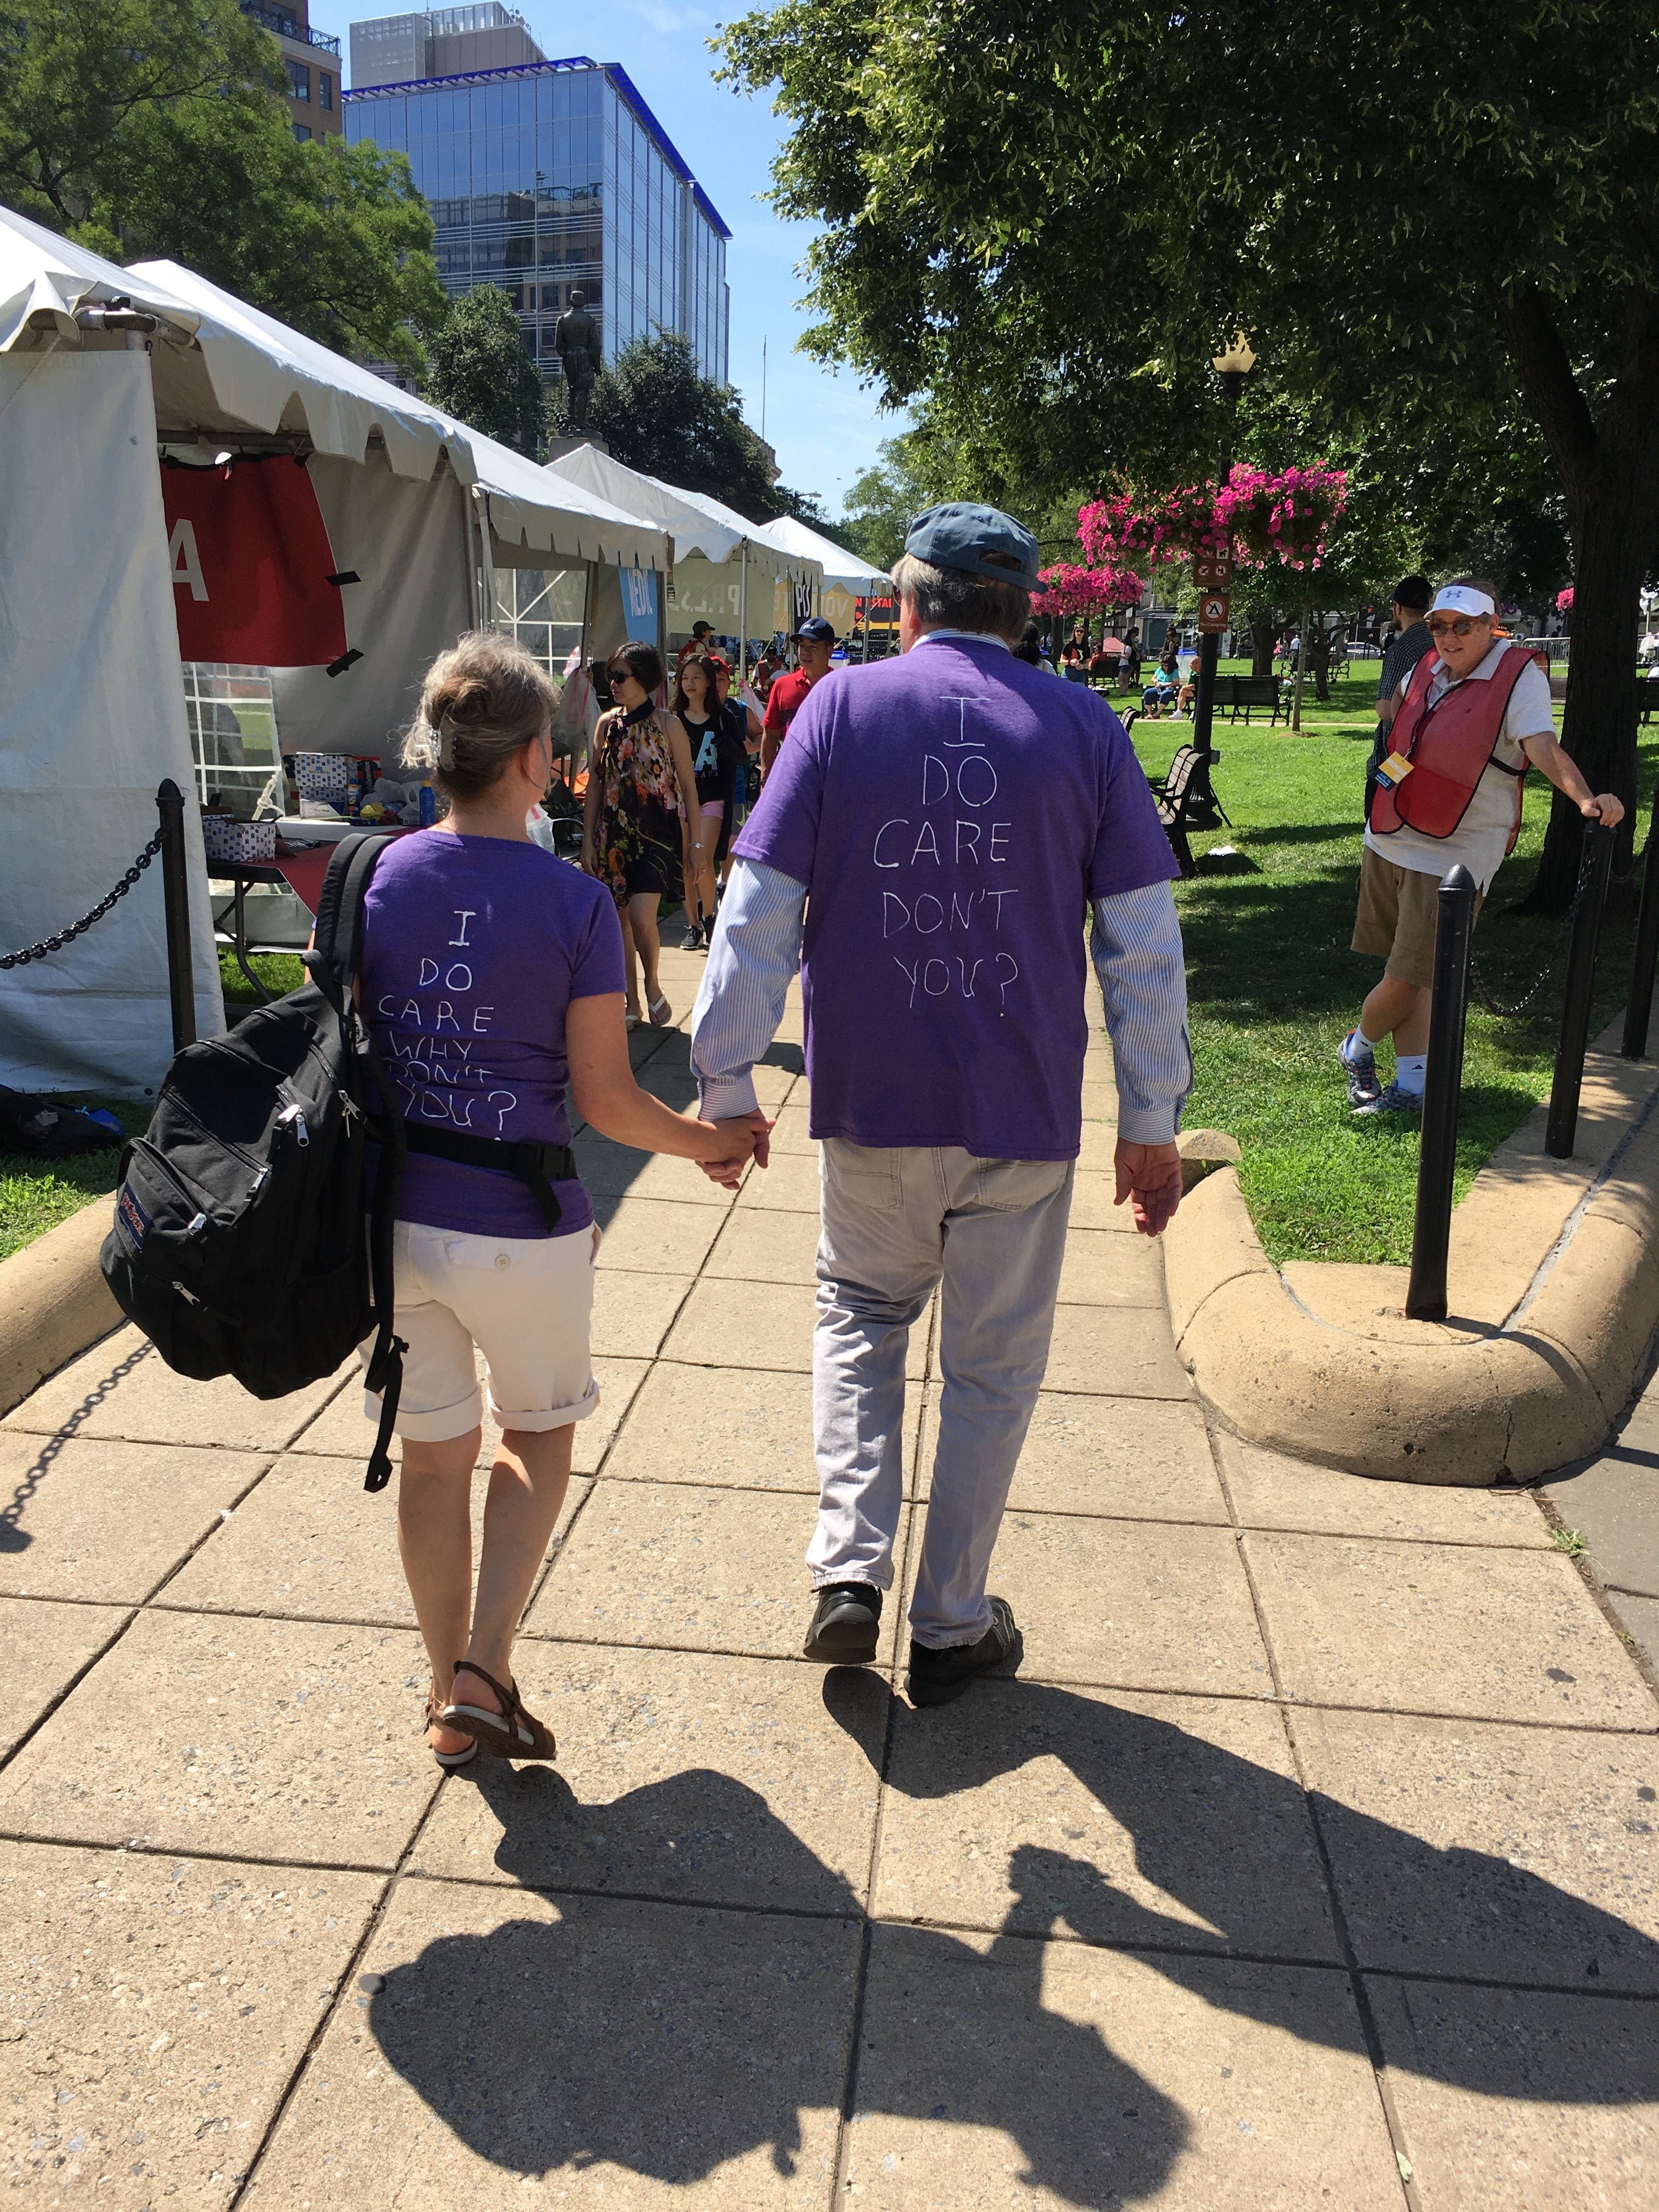 A couple holds hands wearing shirts that say, "I do care, don't you?"